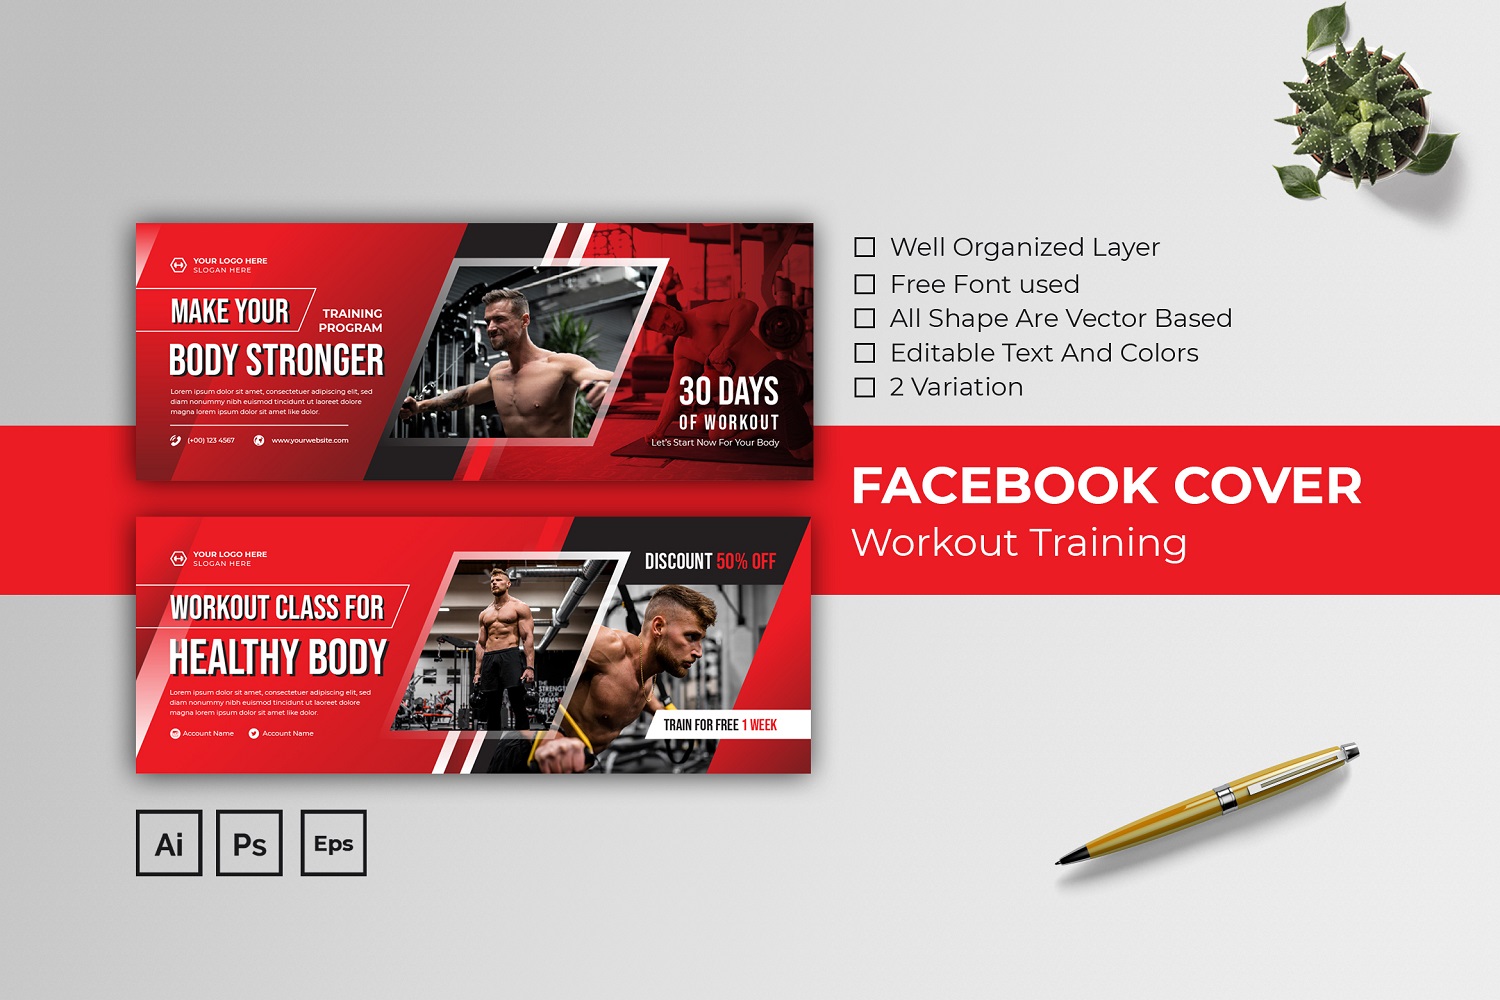 Workout Training Facebook Cover